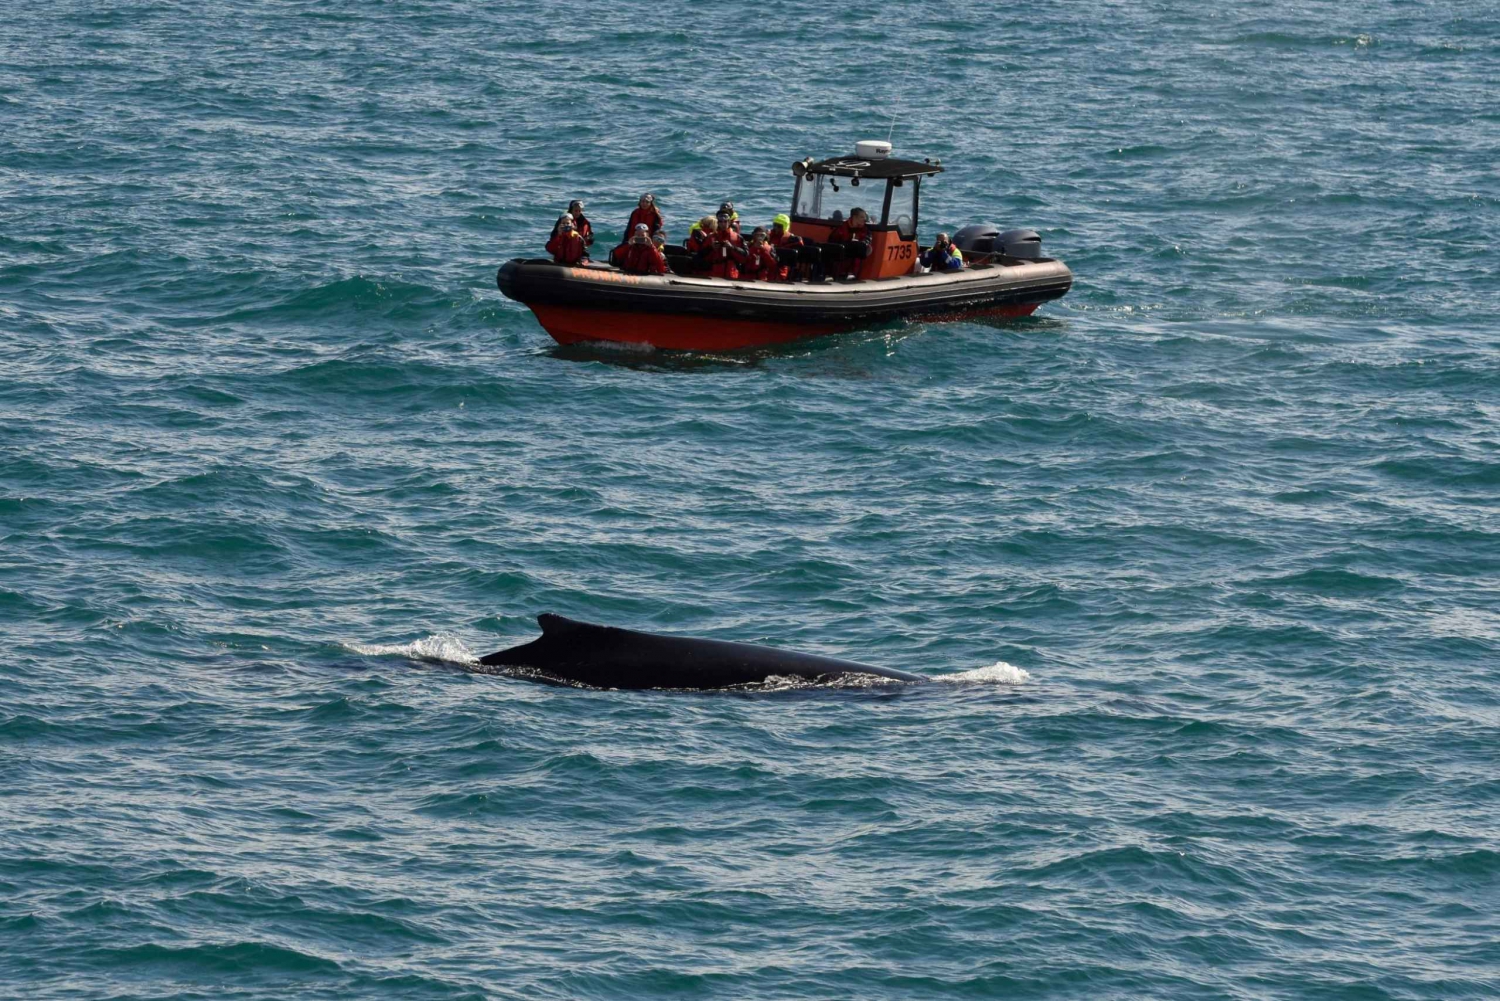 From Reykjavik: 2-Hour Whale & Puffin Watching RIB Boat Tour